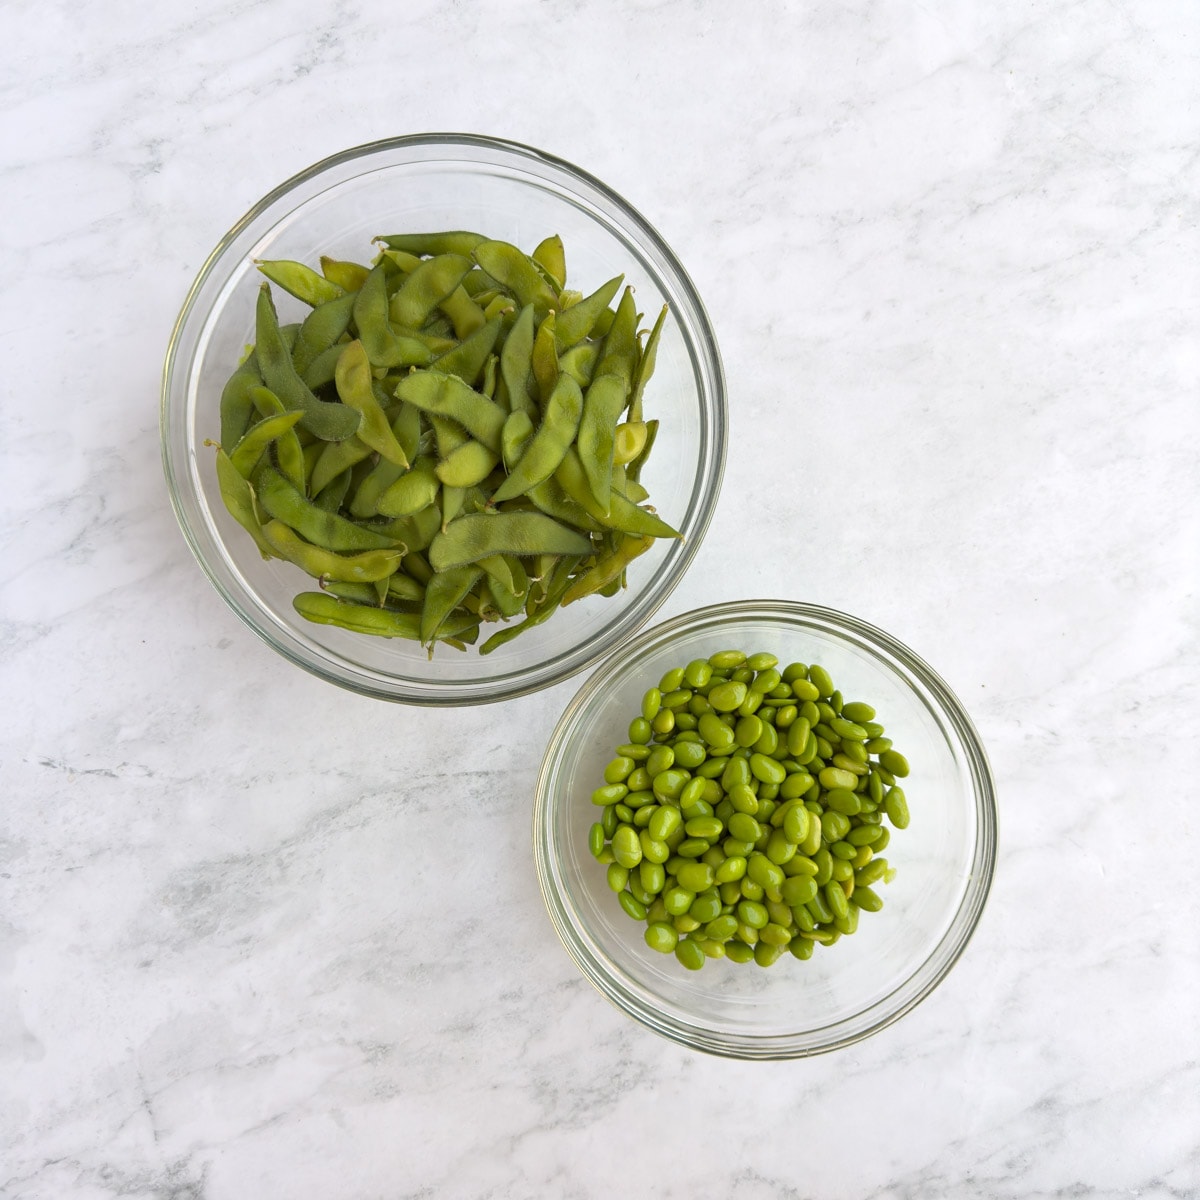 Shelled edamame and spent pods in glass bowls.